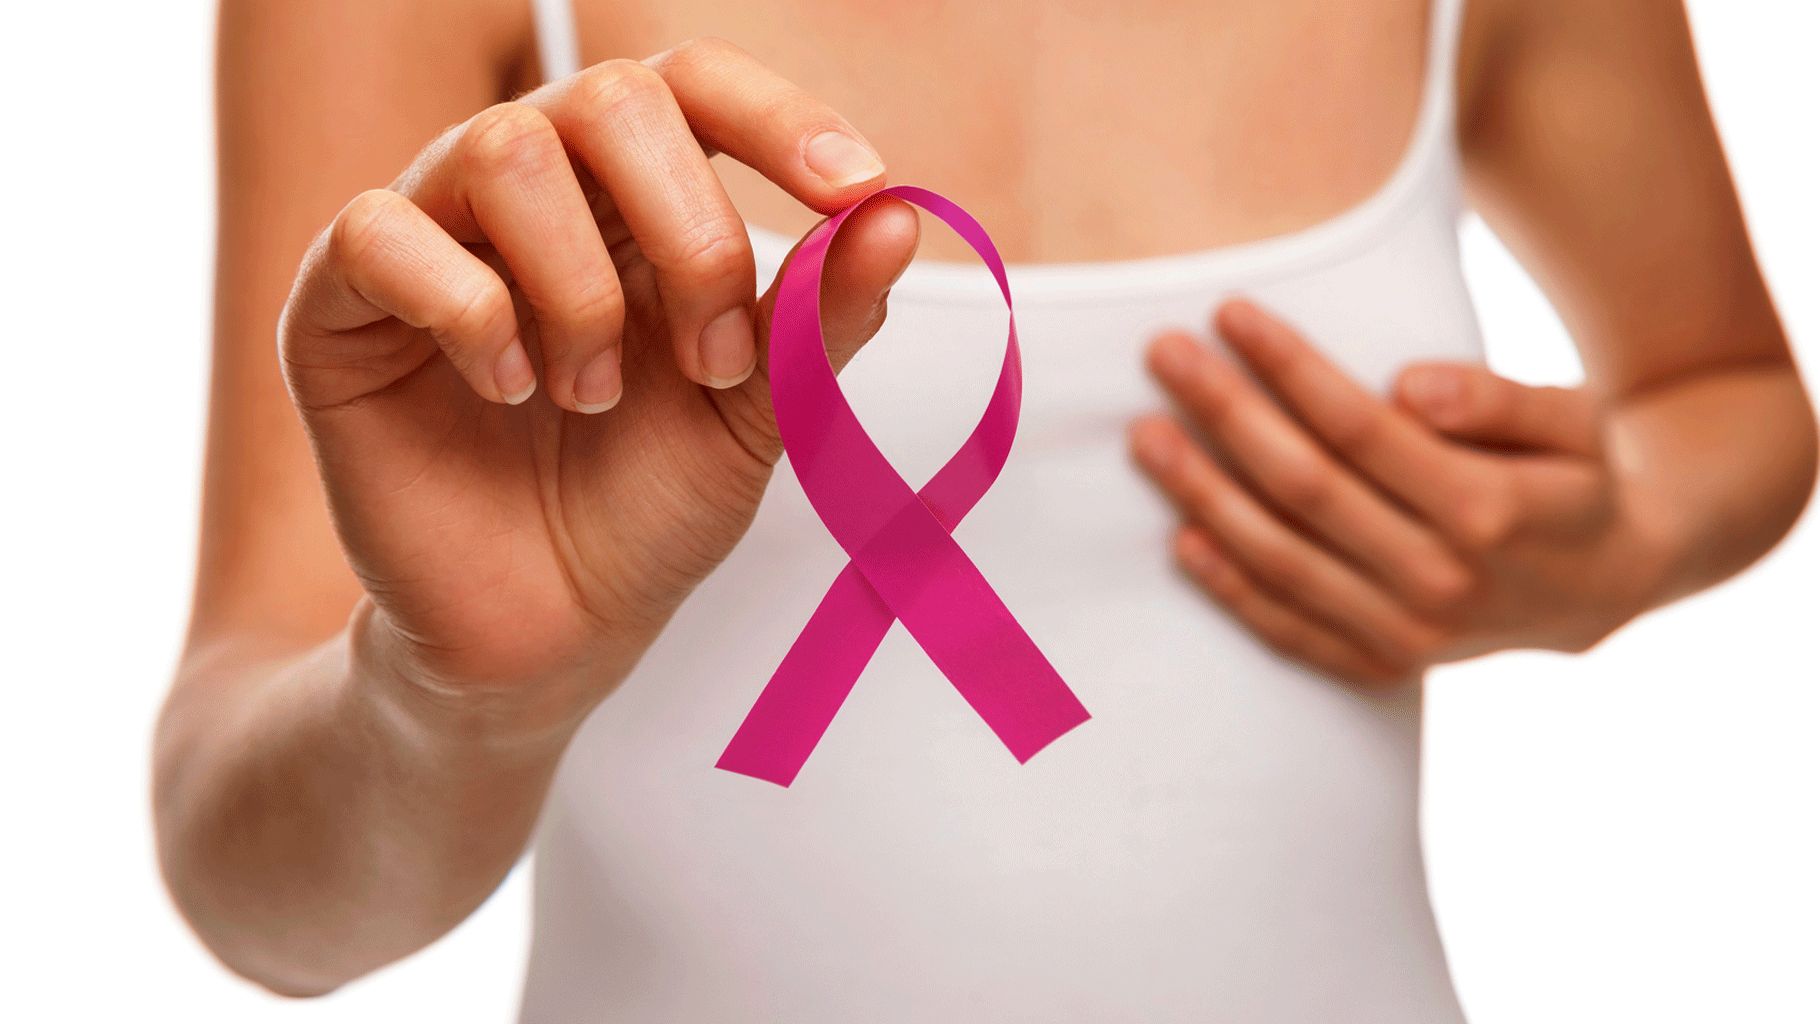 Breast cancer survivors might me more likely to suffer from mental health issues, says study.